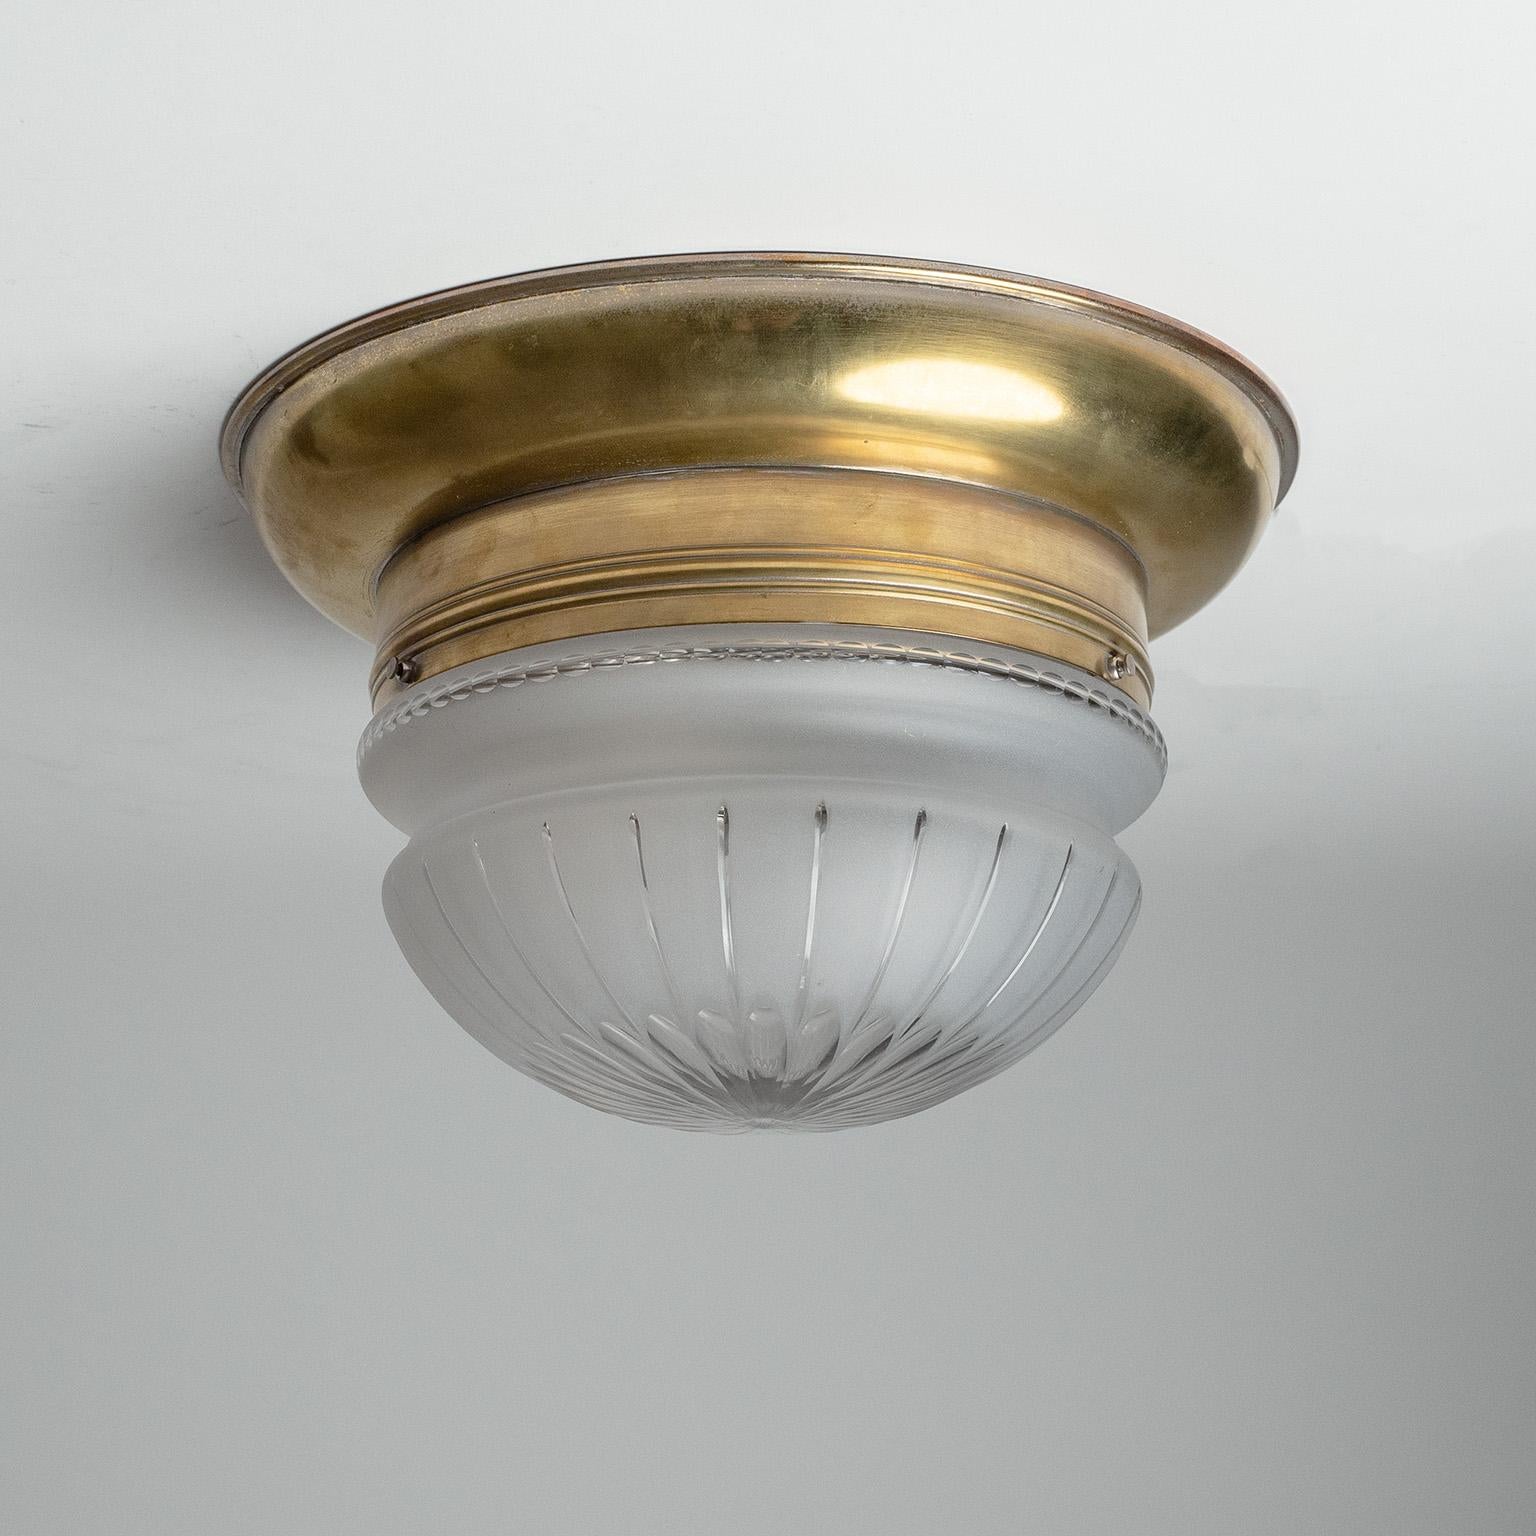 Fine Austrian brass flush mount with intricately cut glass diffuser from the 1920s. Very high quality glasswork, frosted on the outside and cut with a lovely geometric pattern. The inside of the brass body is nickel-plated and has three original